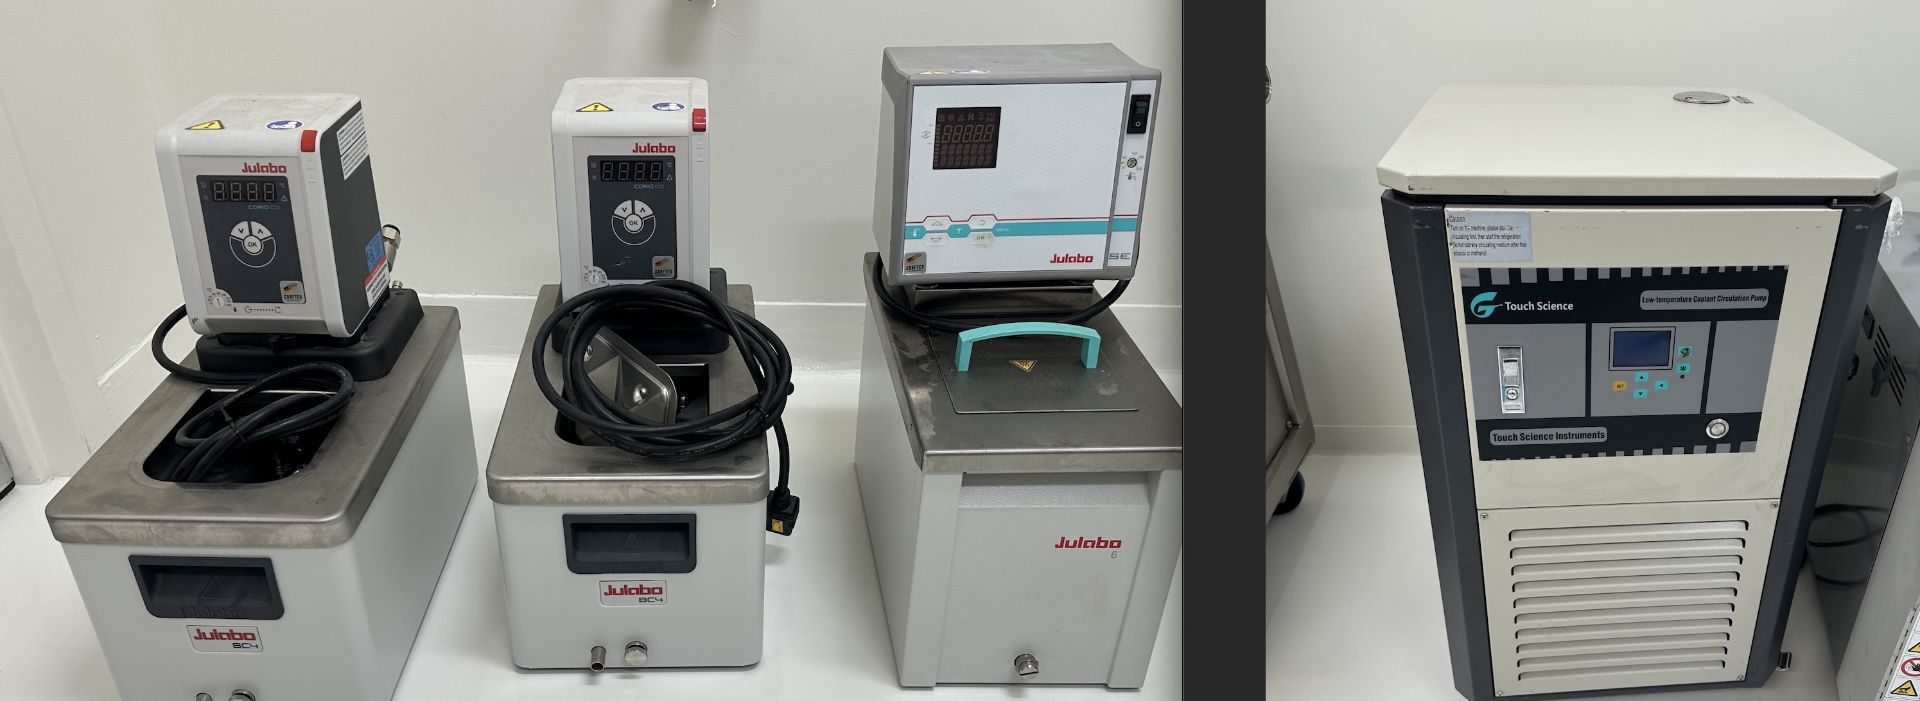 Lot of (4) Assorted Used Circulators, Chillers and Temp Controllers. Julabo SE, Corio etc